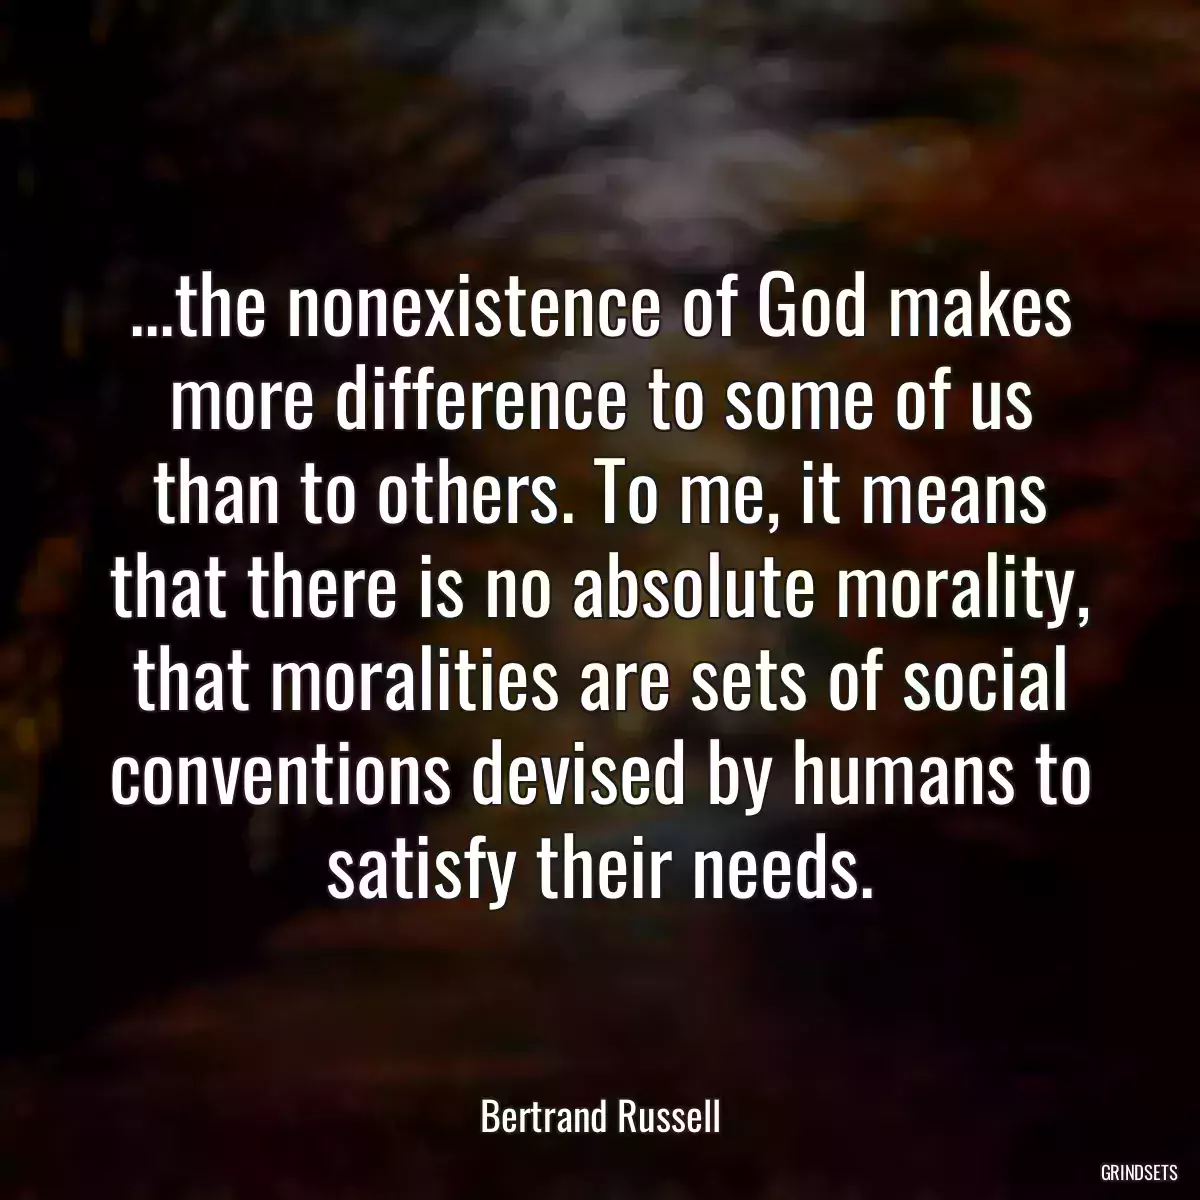 ...the nonexistence of God makes more difference to some of us than to others. To me, it means that there is no absolute morality, that moralities are sets of social conventions devised by humans to satisfy their needs.